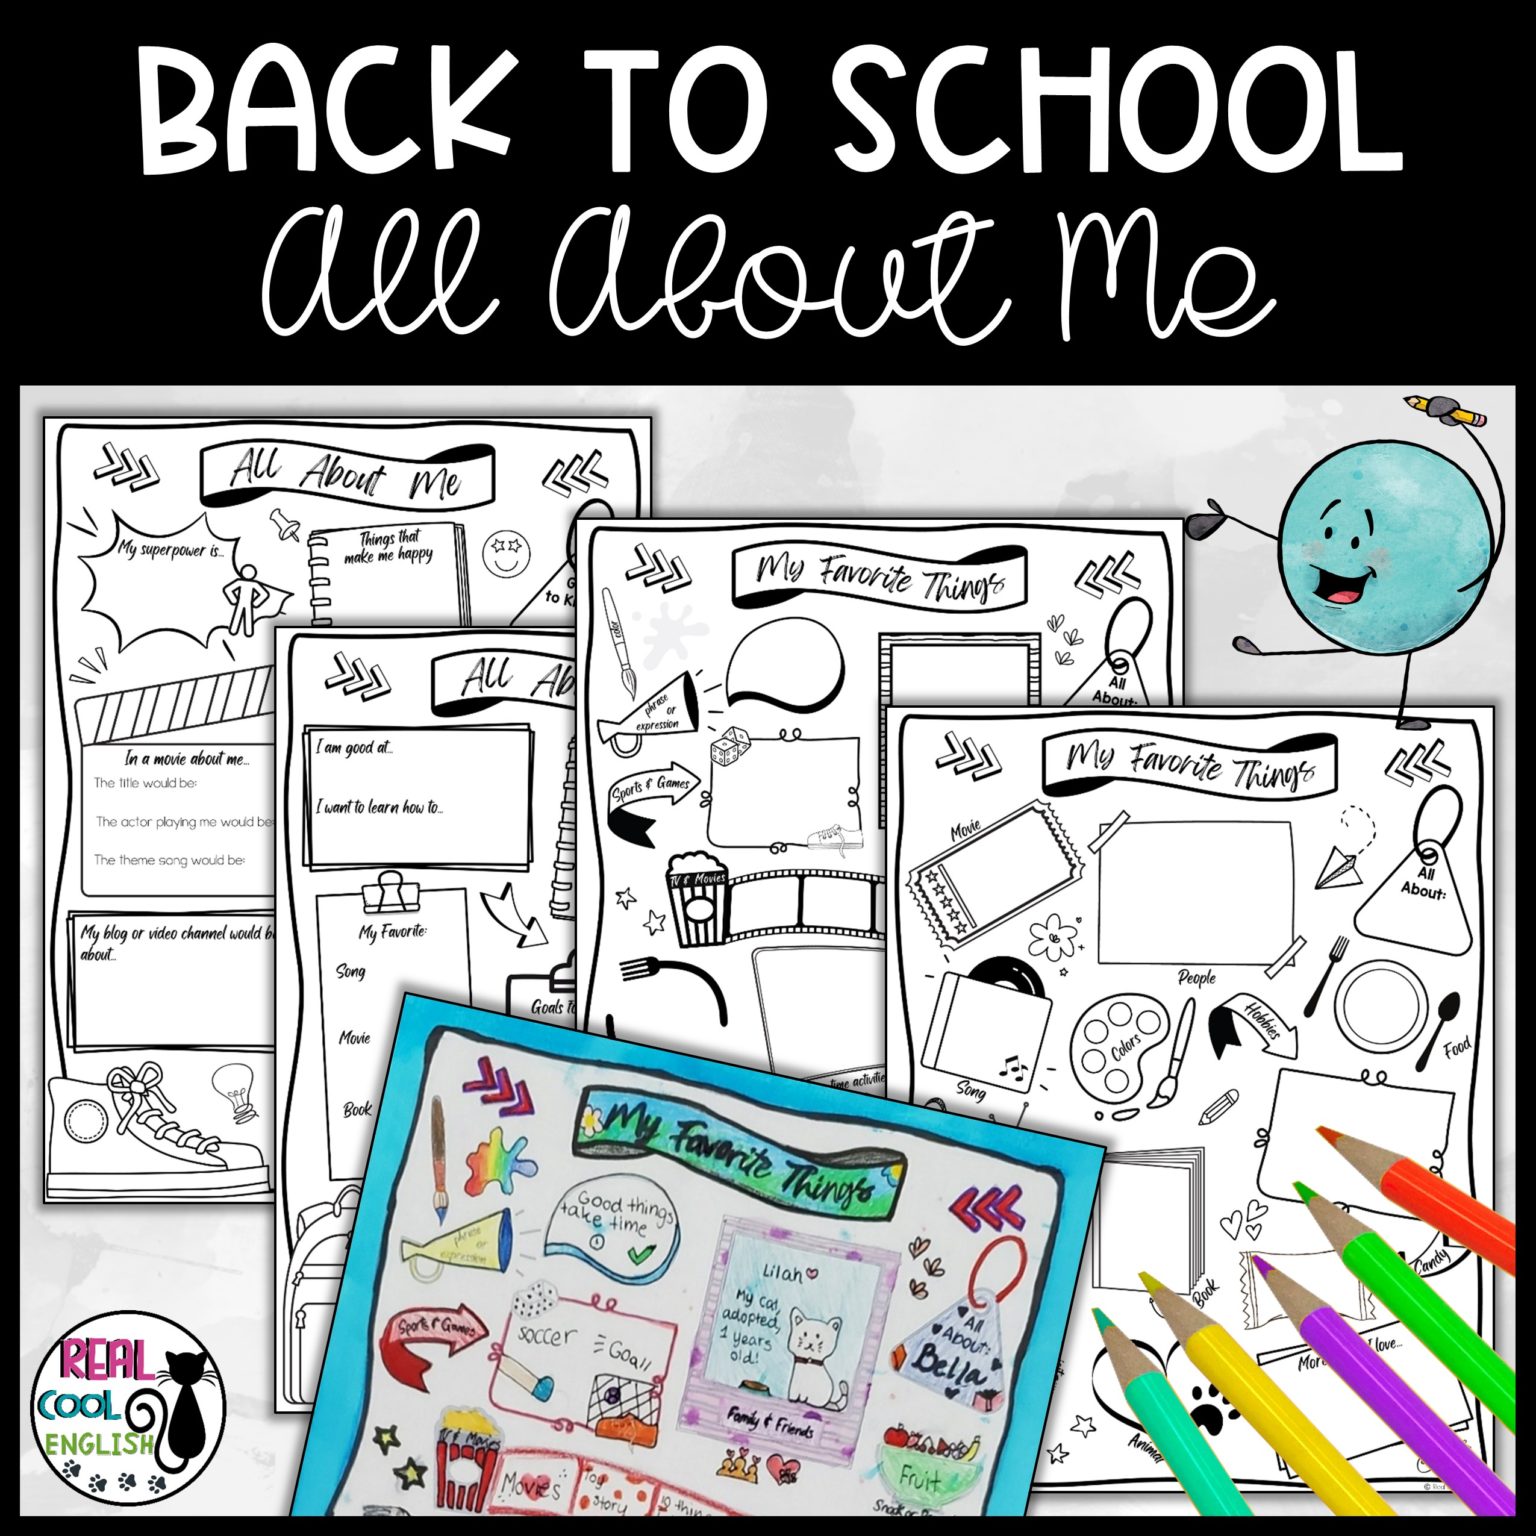 Back to School Icebreakers Your Students Will Love!